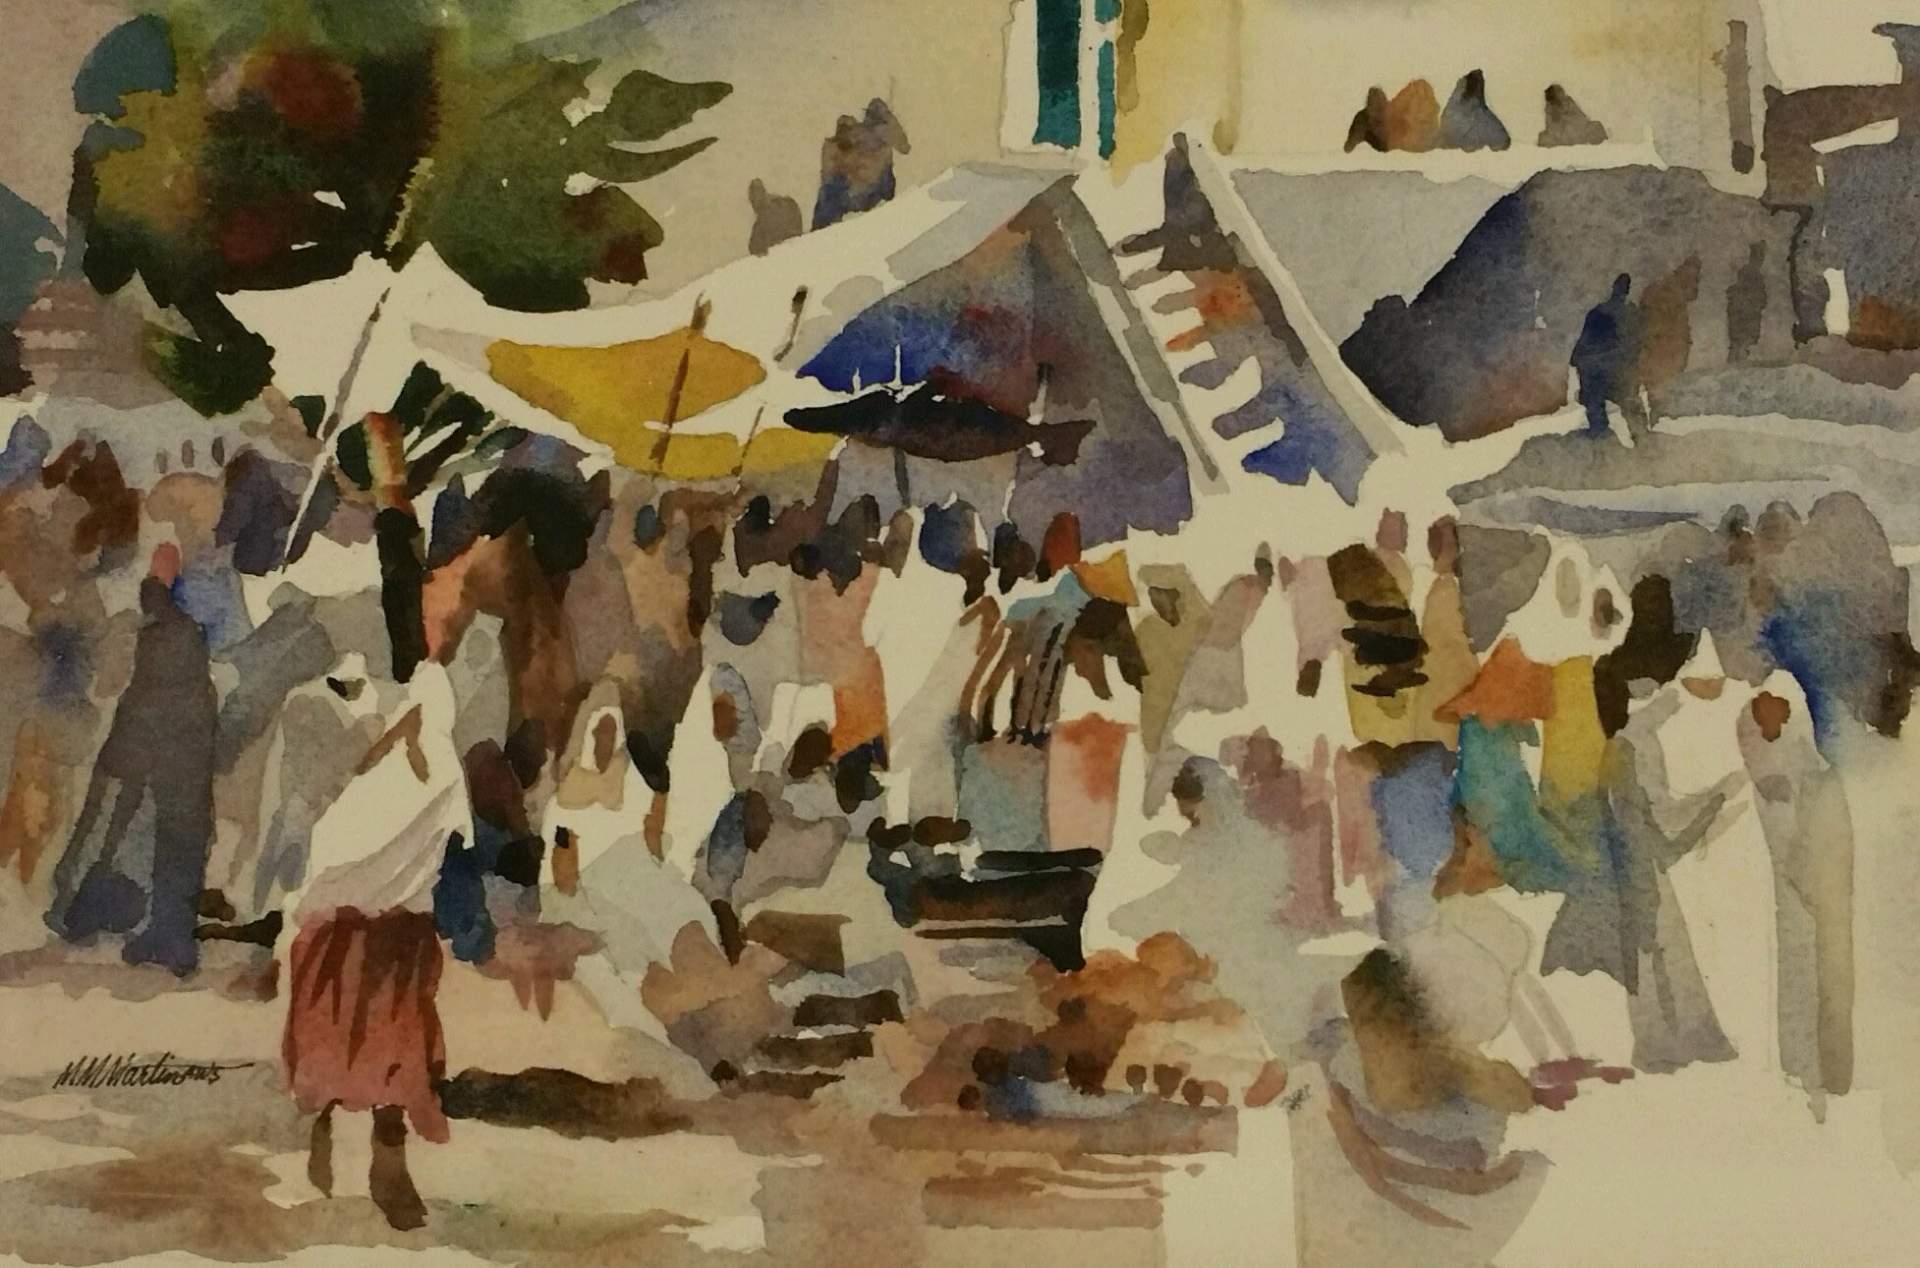 Untitled Study (marketplace, possibly Greece)